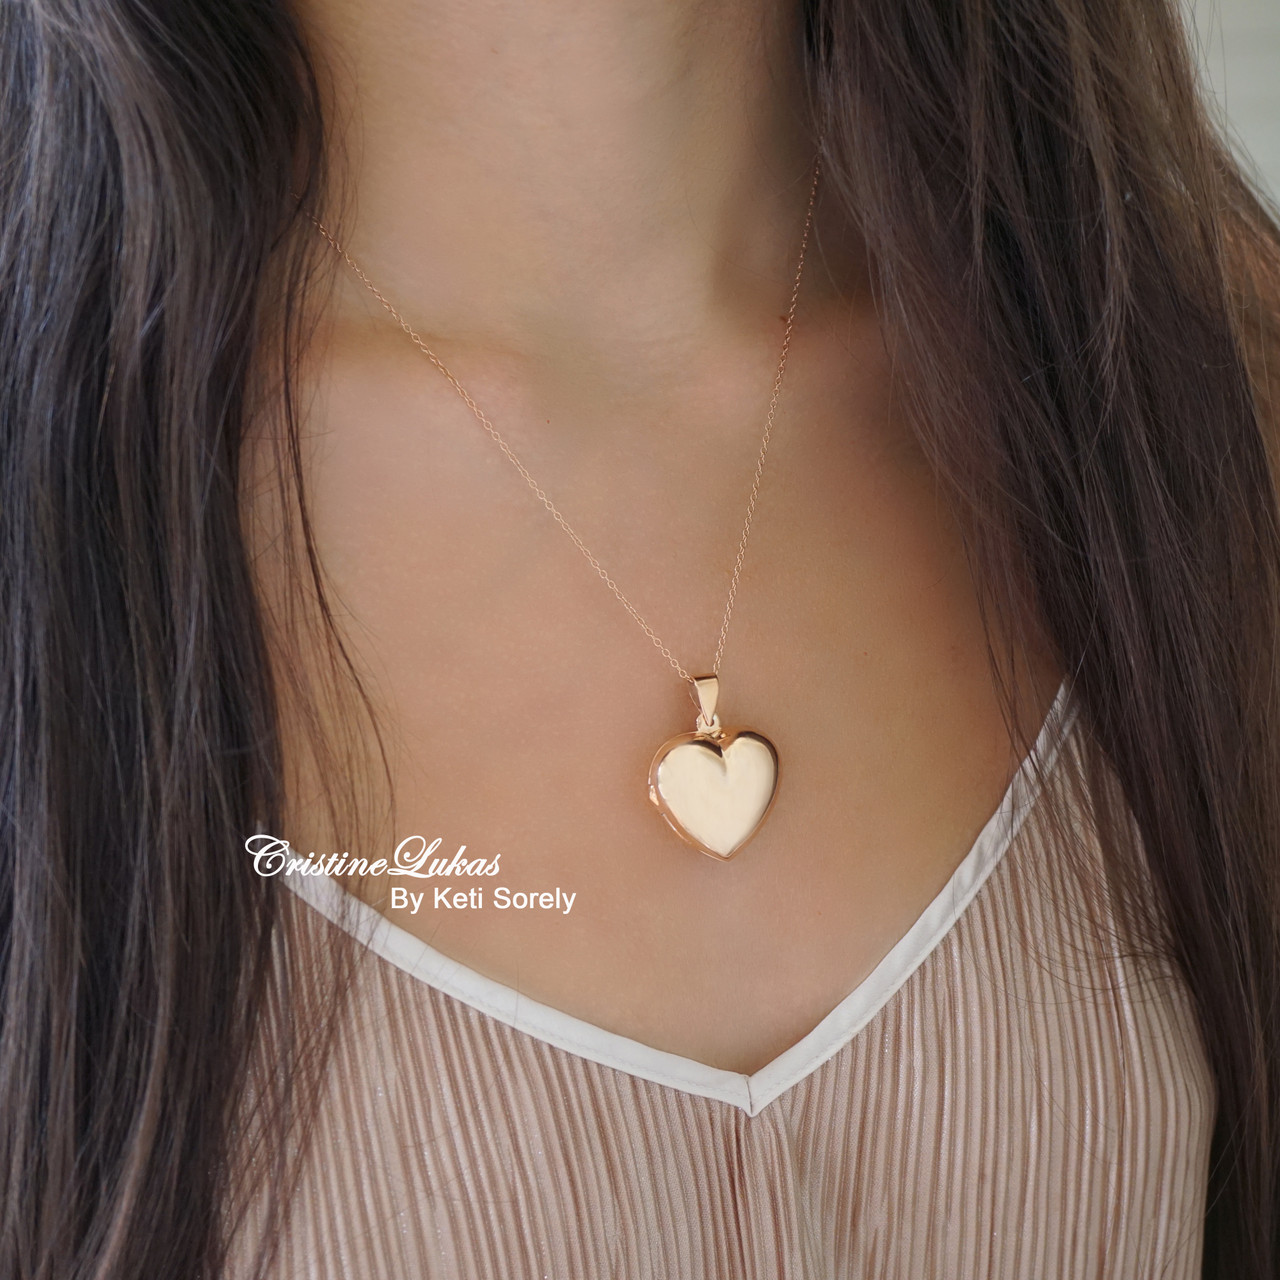 Heart Necklace in Onyx large – Anomaly